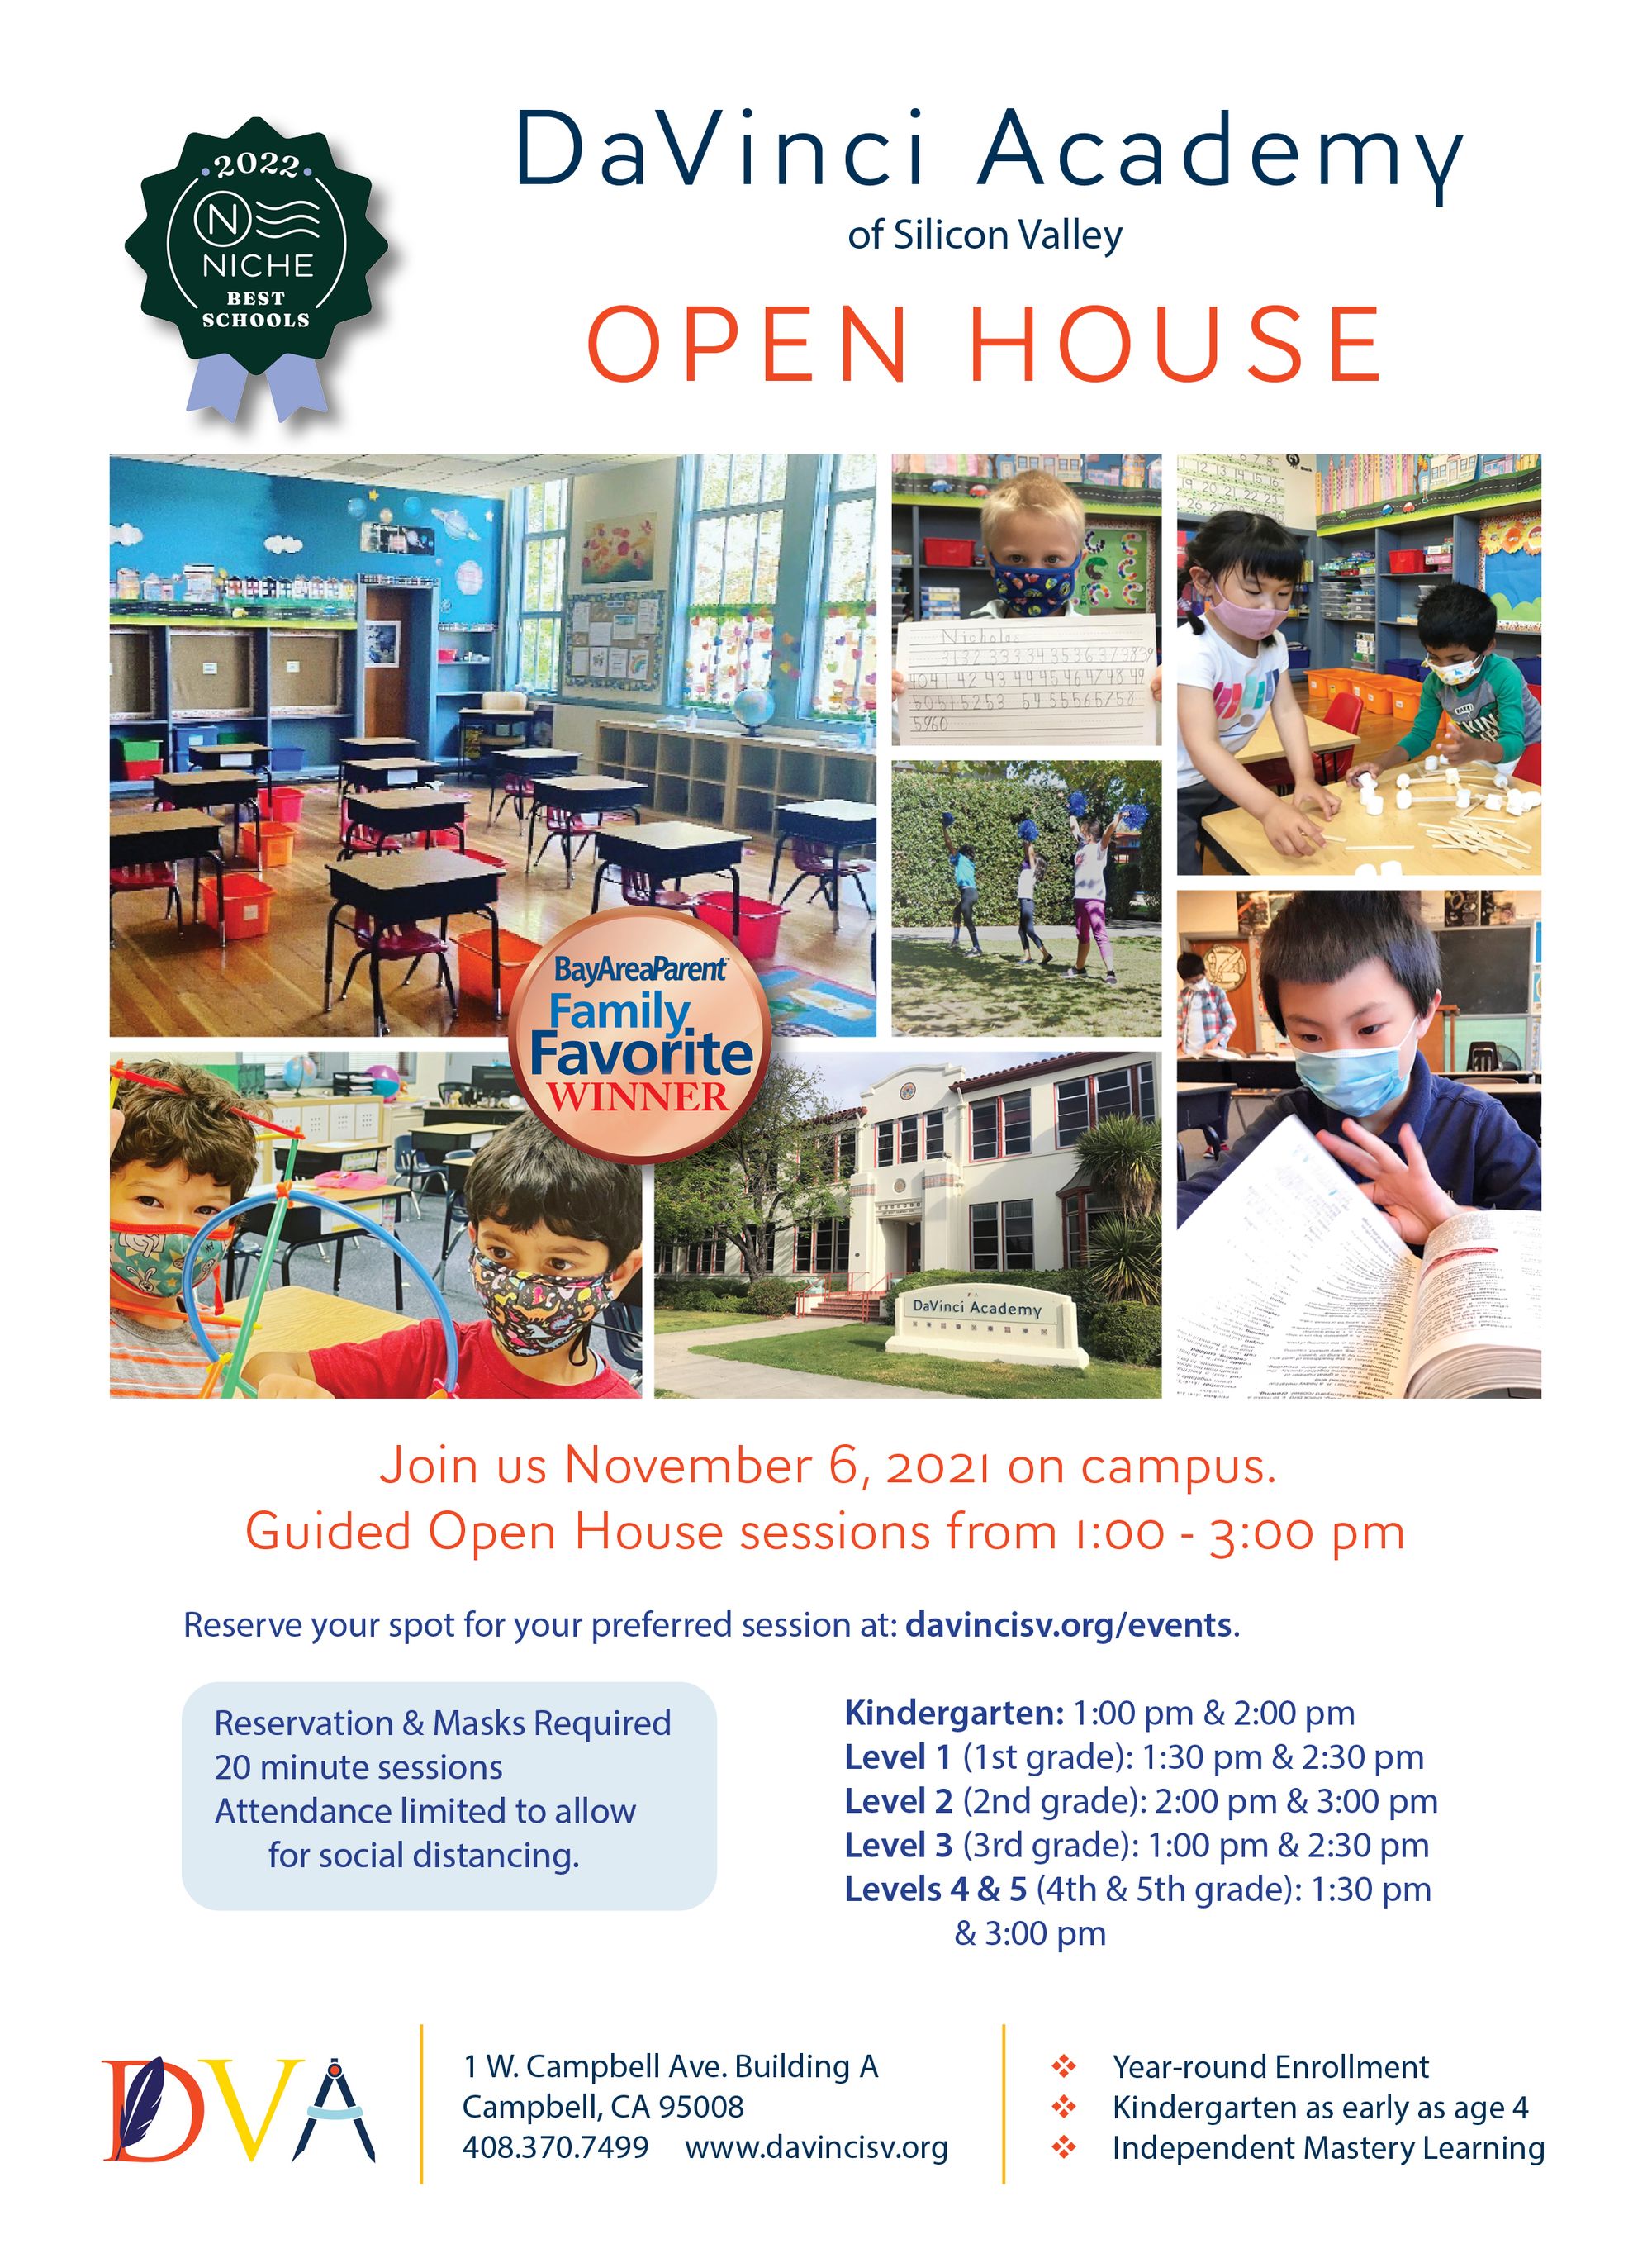 Flier announcing the Nov 6 Guided Open House for K-5. RSVP required at www.davincisv.org/events